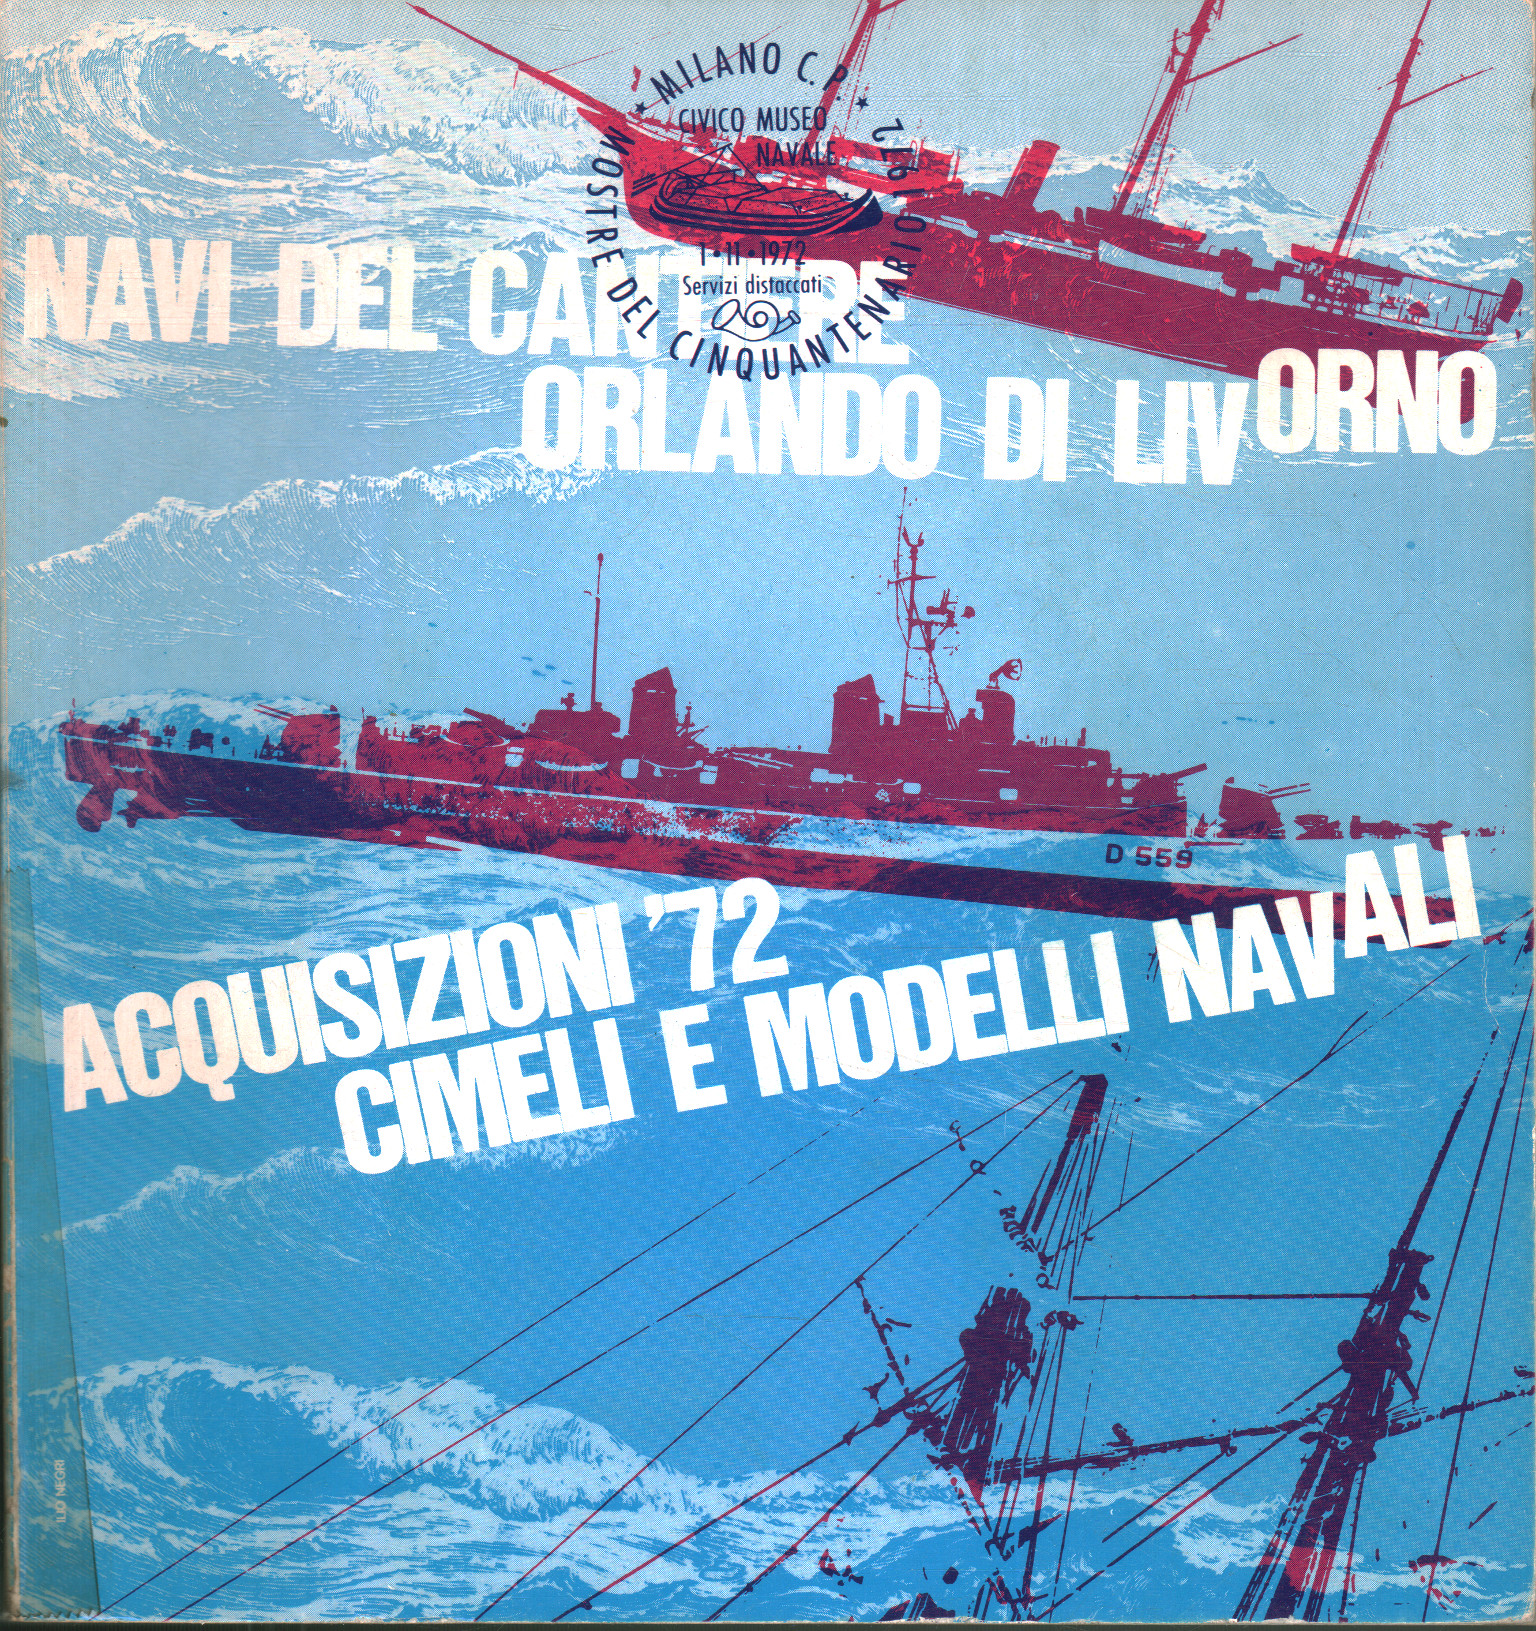 Ships from the Orlando shipyard in Livorno. Acquisitions, AA.VV.